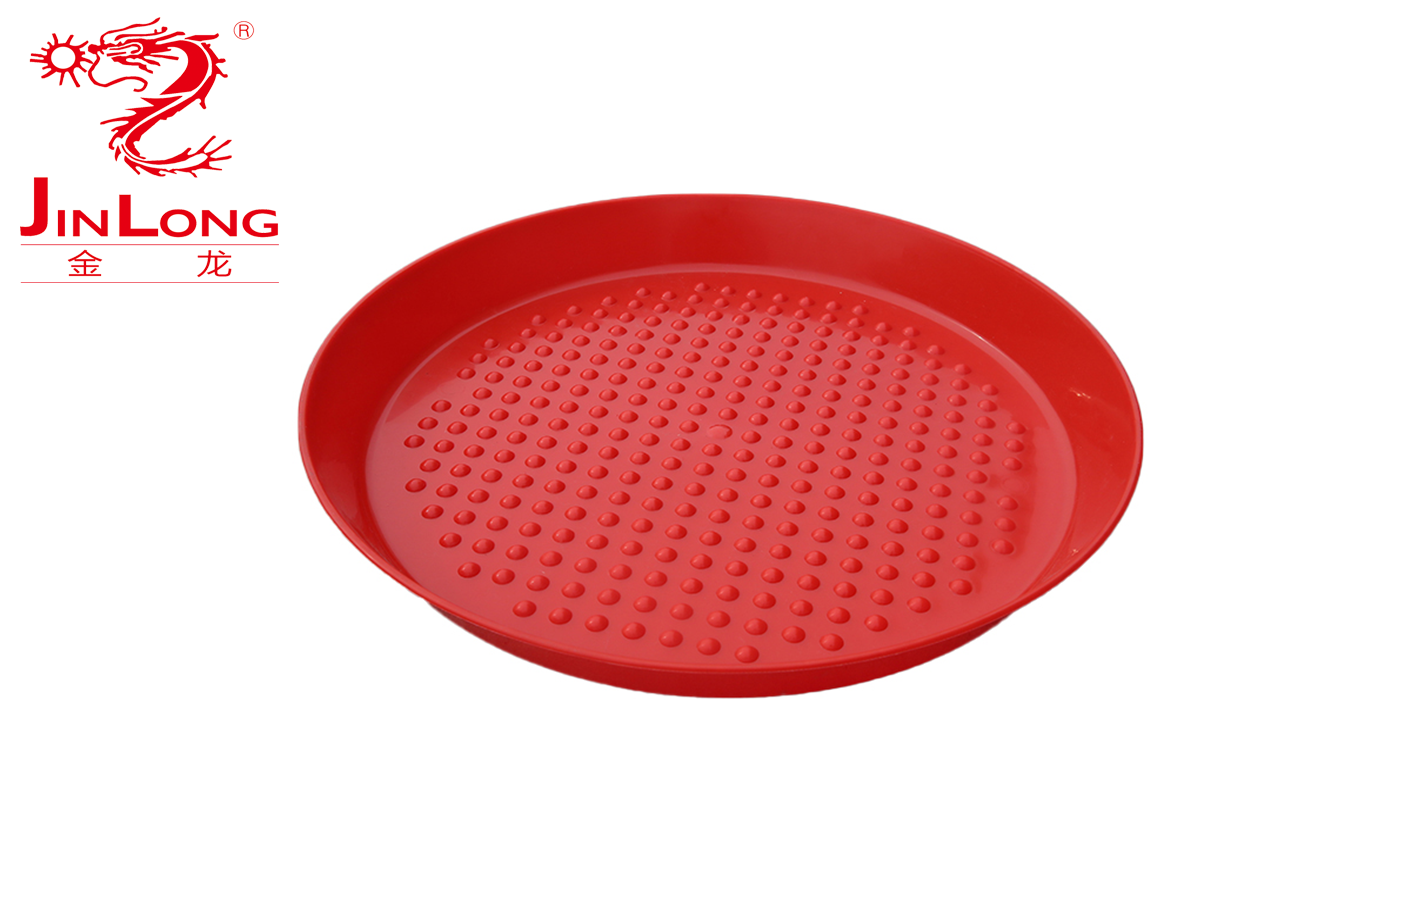 Premium Chick Feed Tray - Red Plastic